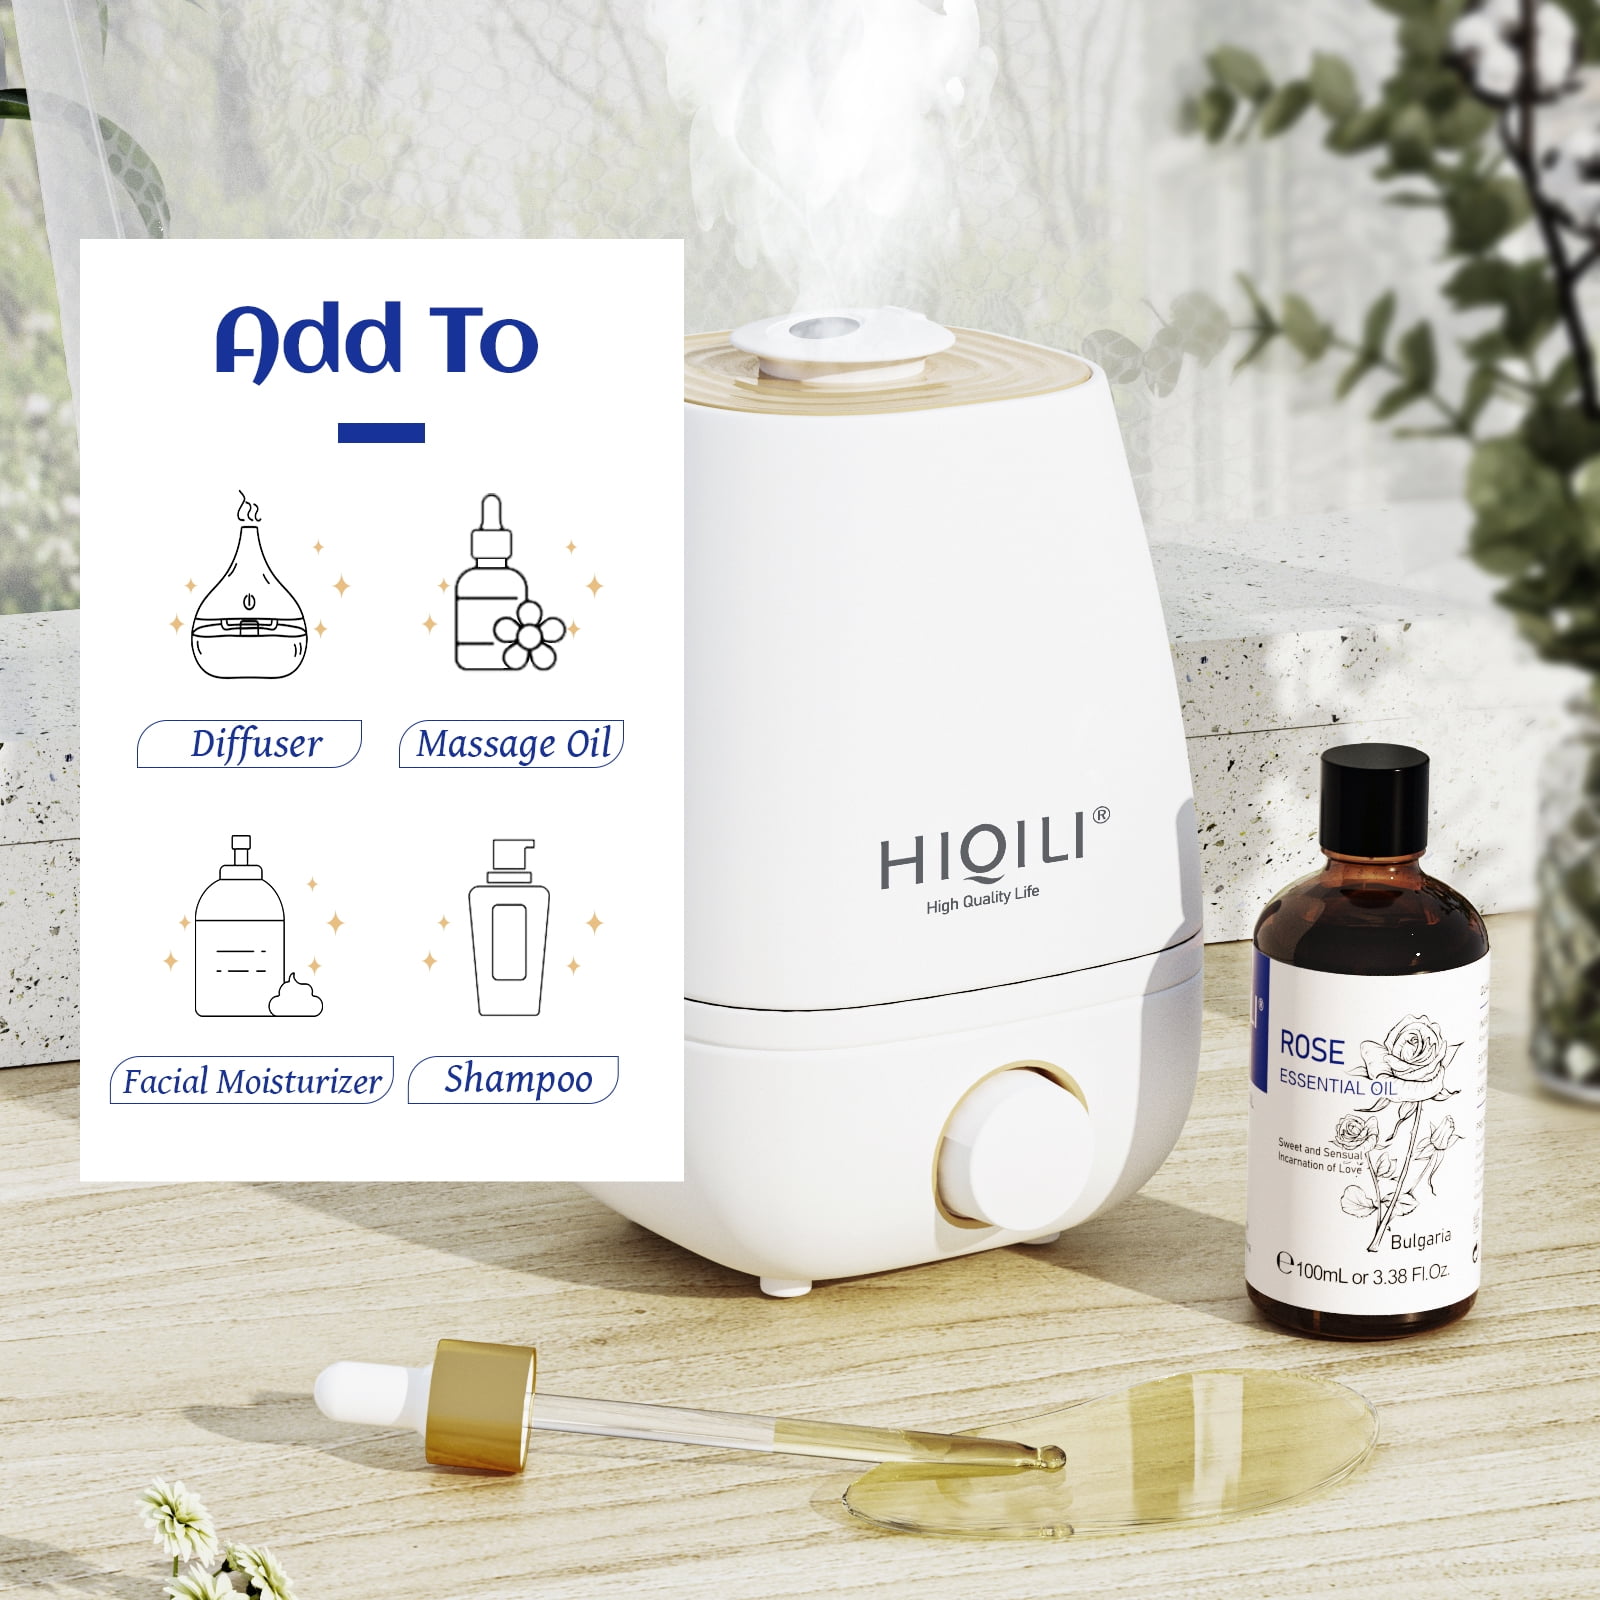 Hanolly Essential Oils Set, Aromatherapy Essential Oil Kit for Diffuser,  Humidifier, Massage, Skin Care (32 x